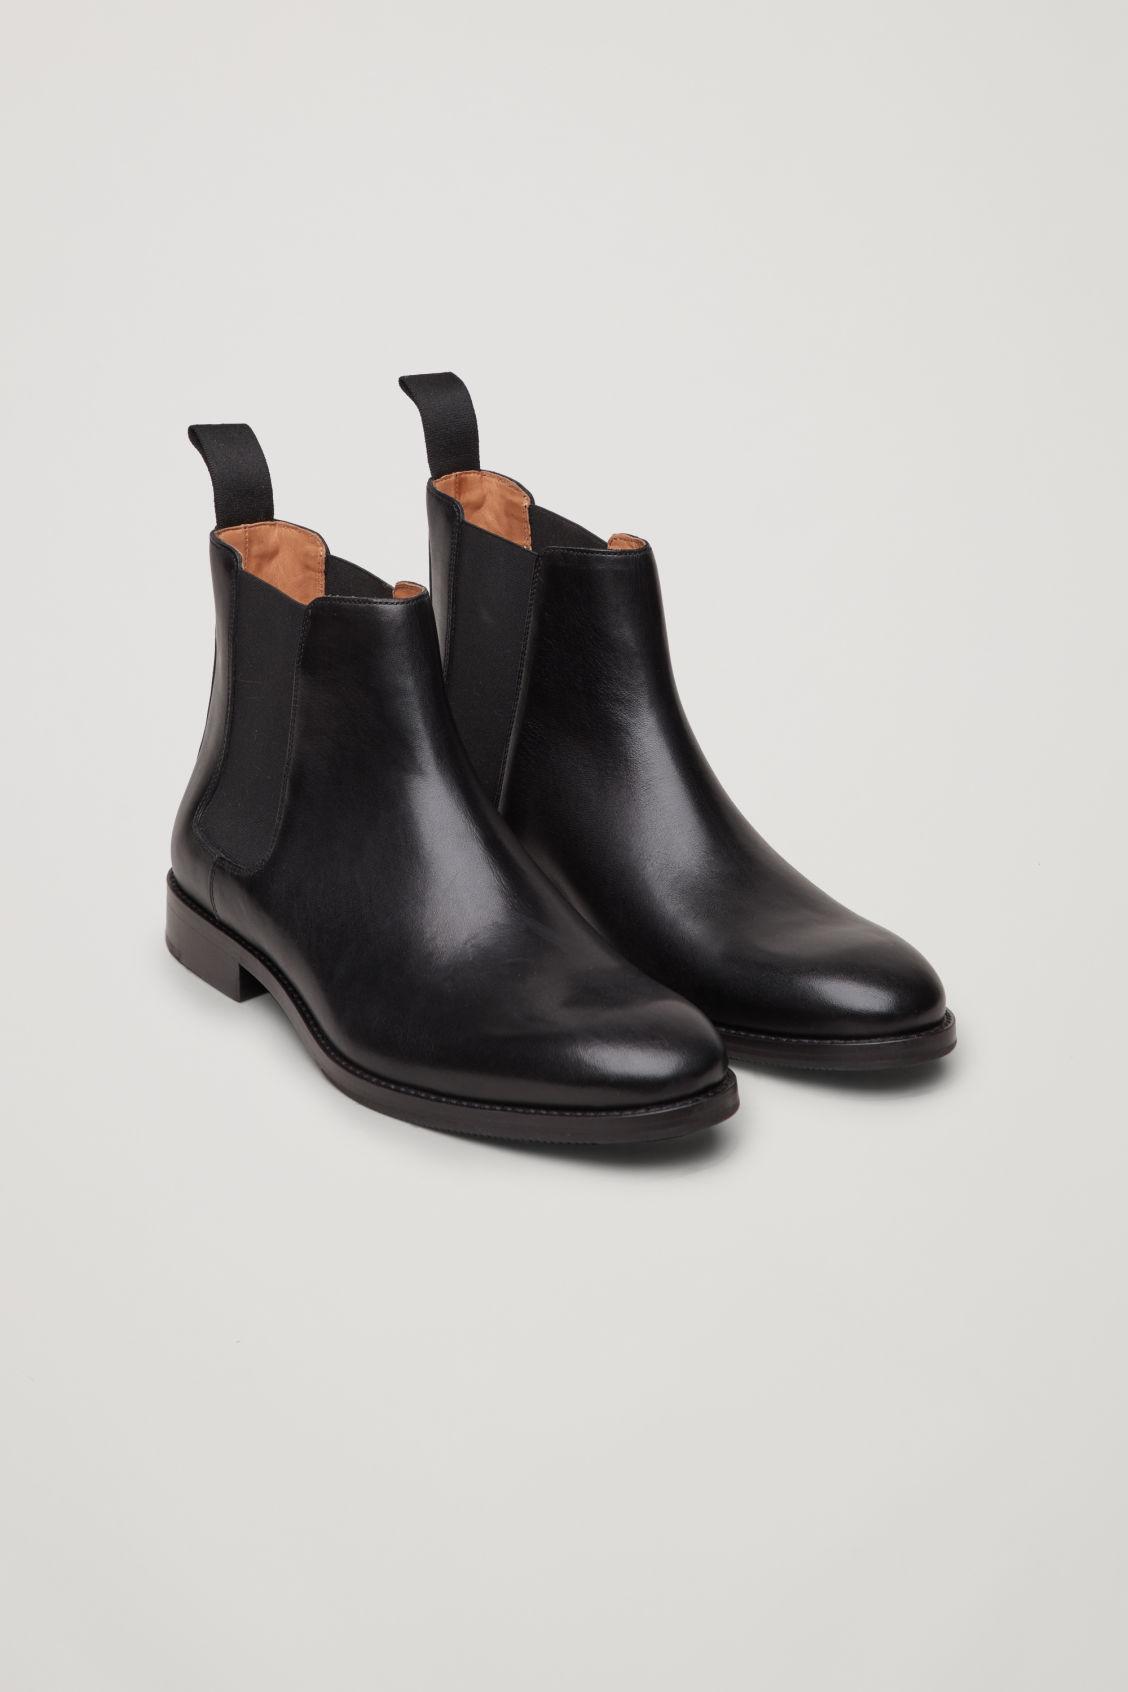 COS Leather Chelsea Boots in Black for Men | Lyst